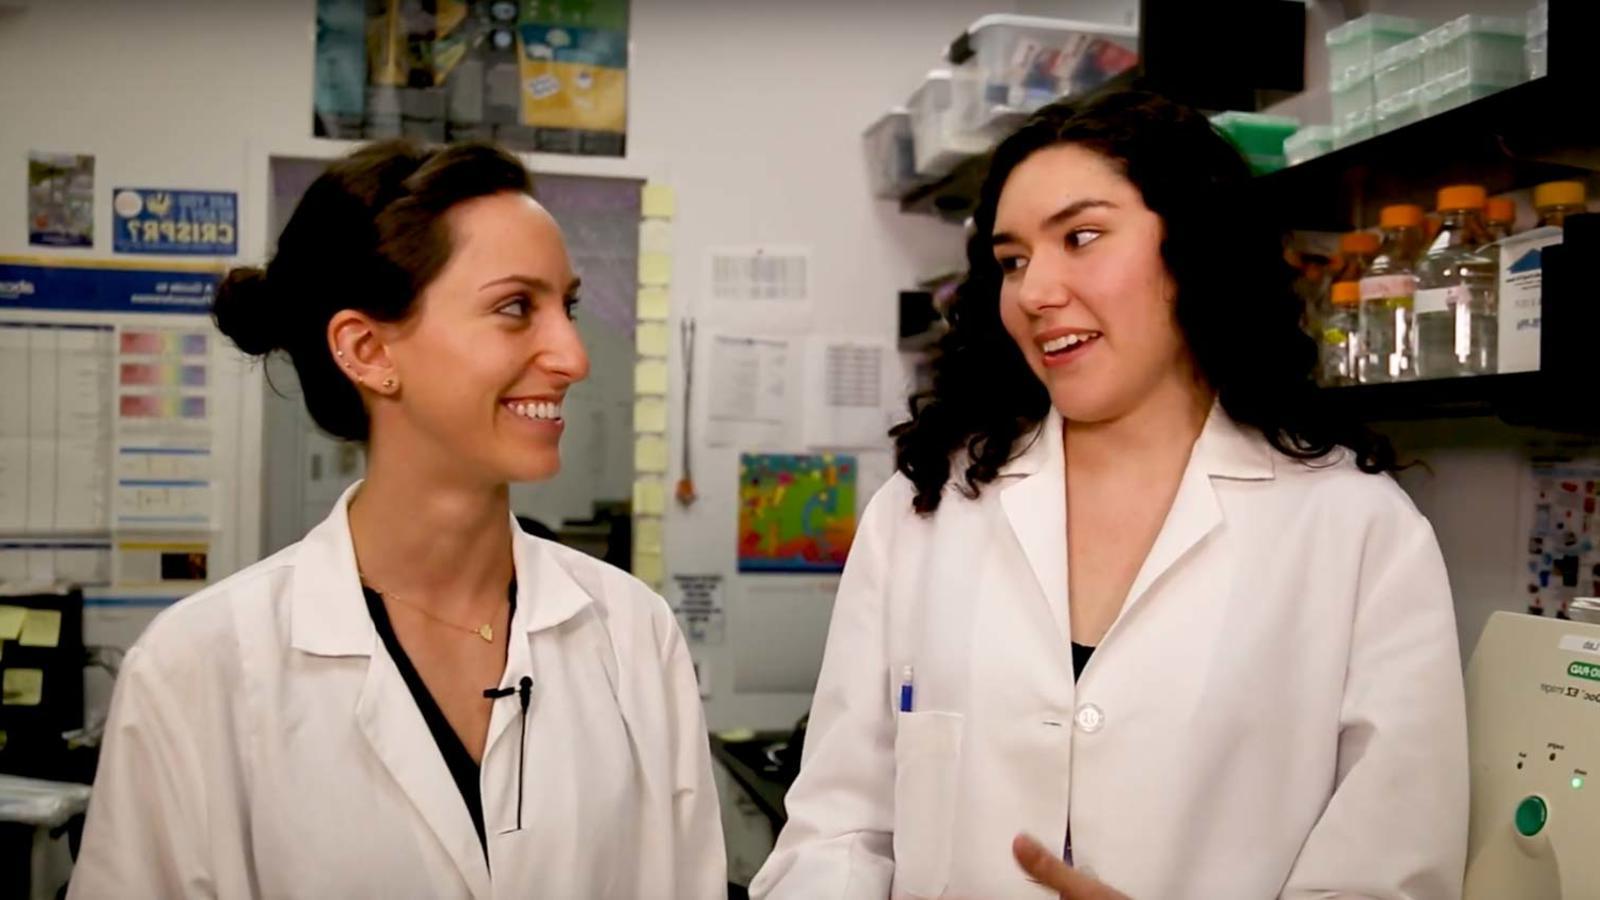 Two young women in lab coats speaking in a science lab